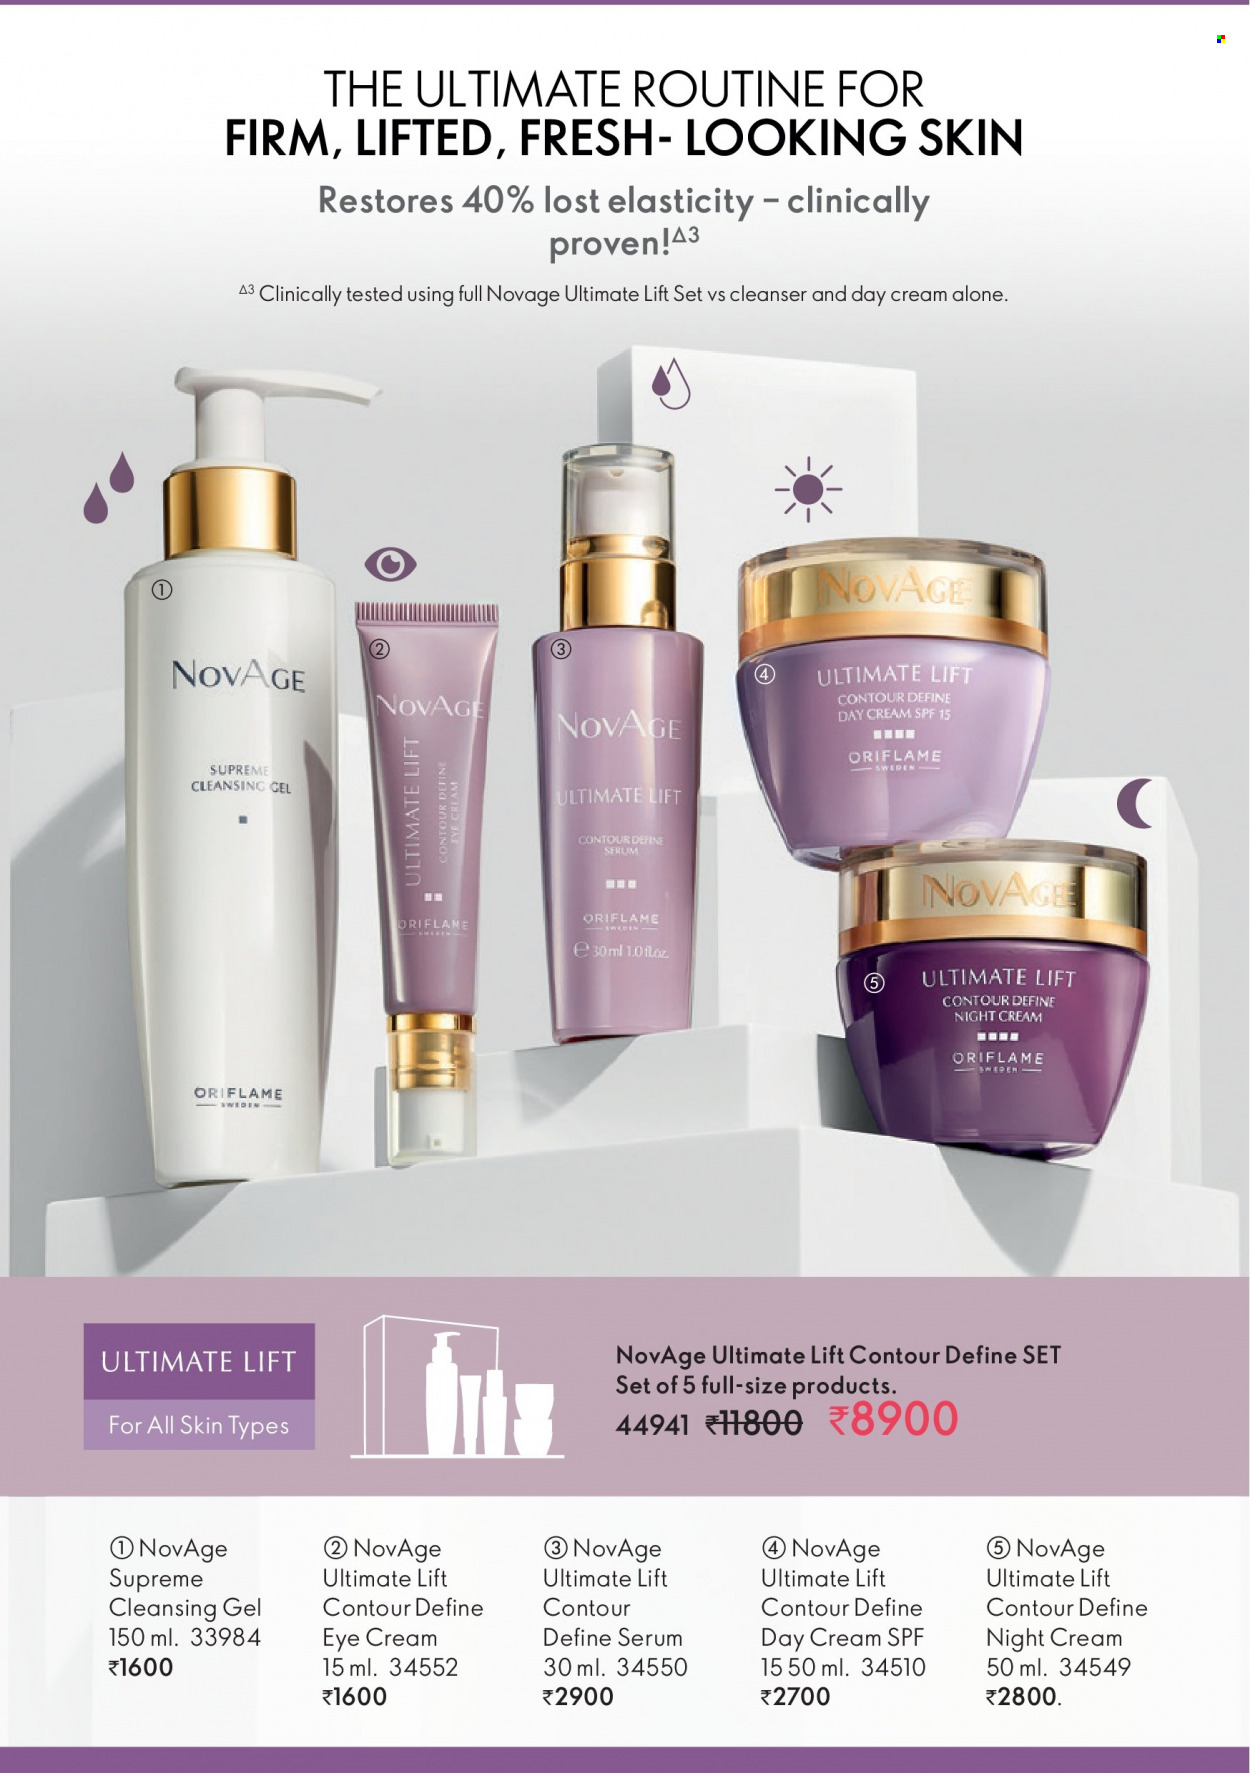 Oriflame offer - 01.03.2023 - 31.03.2023